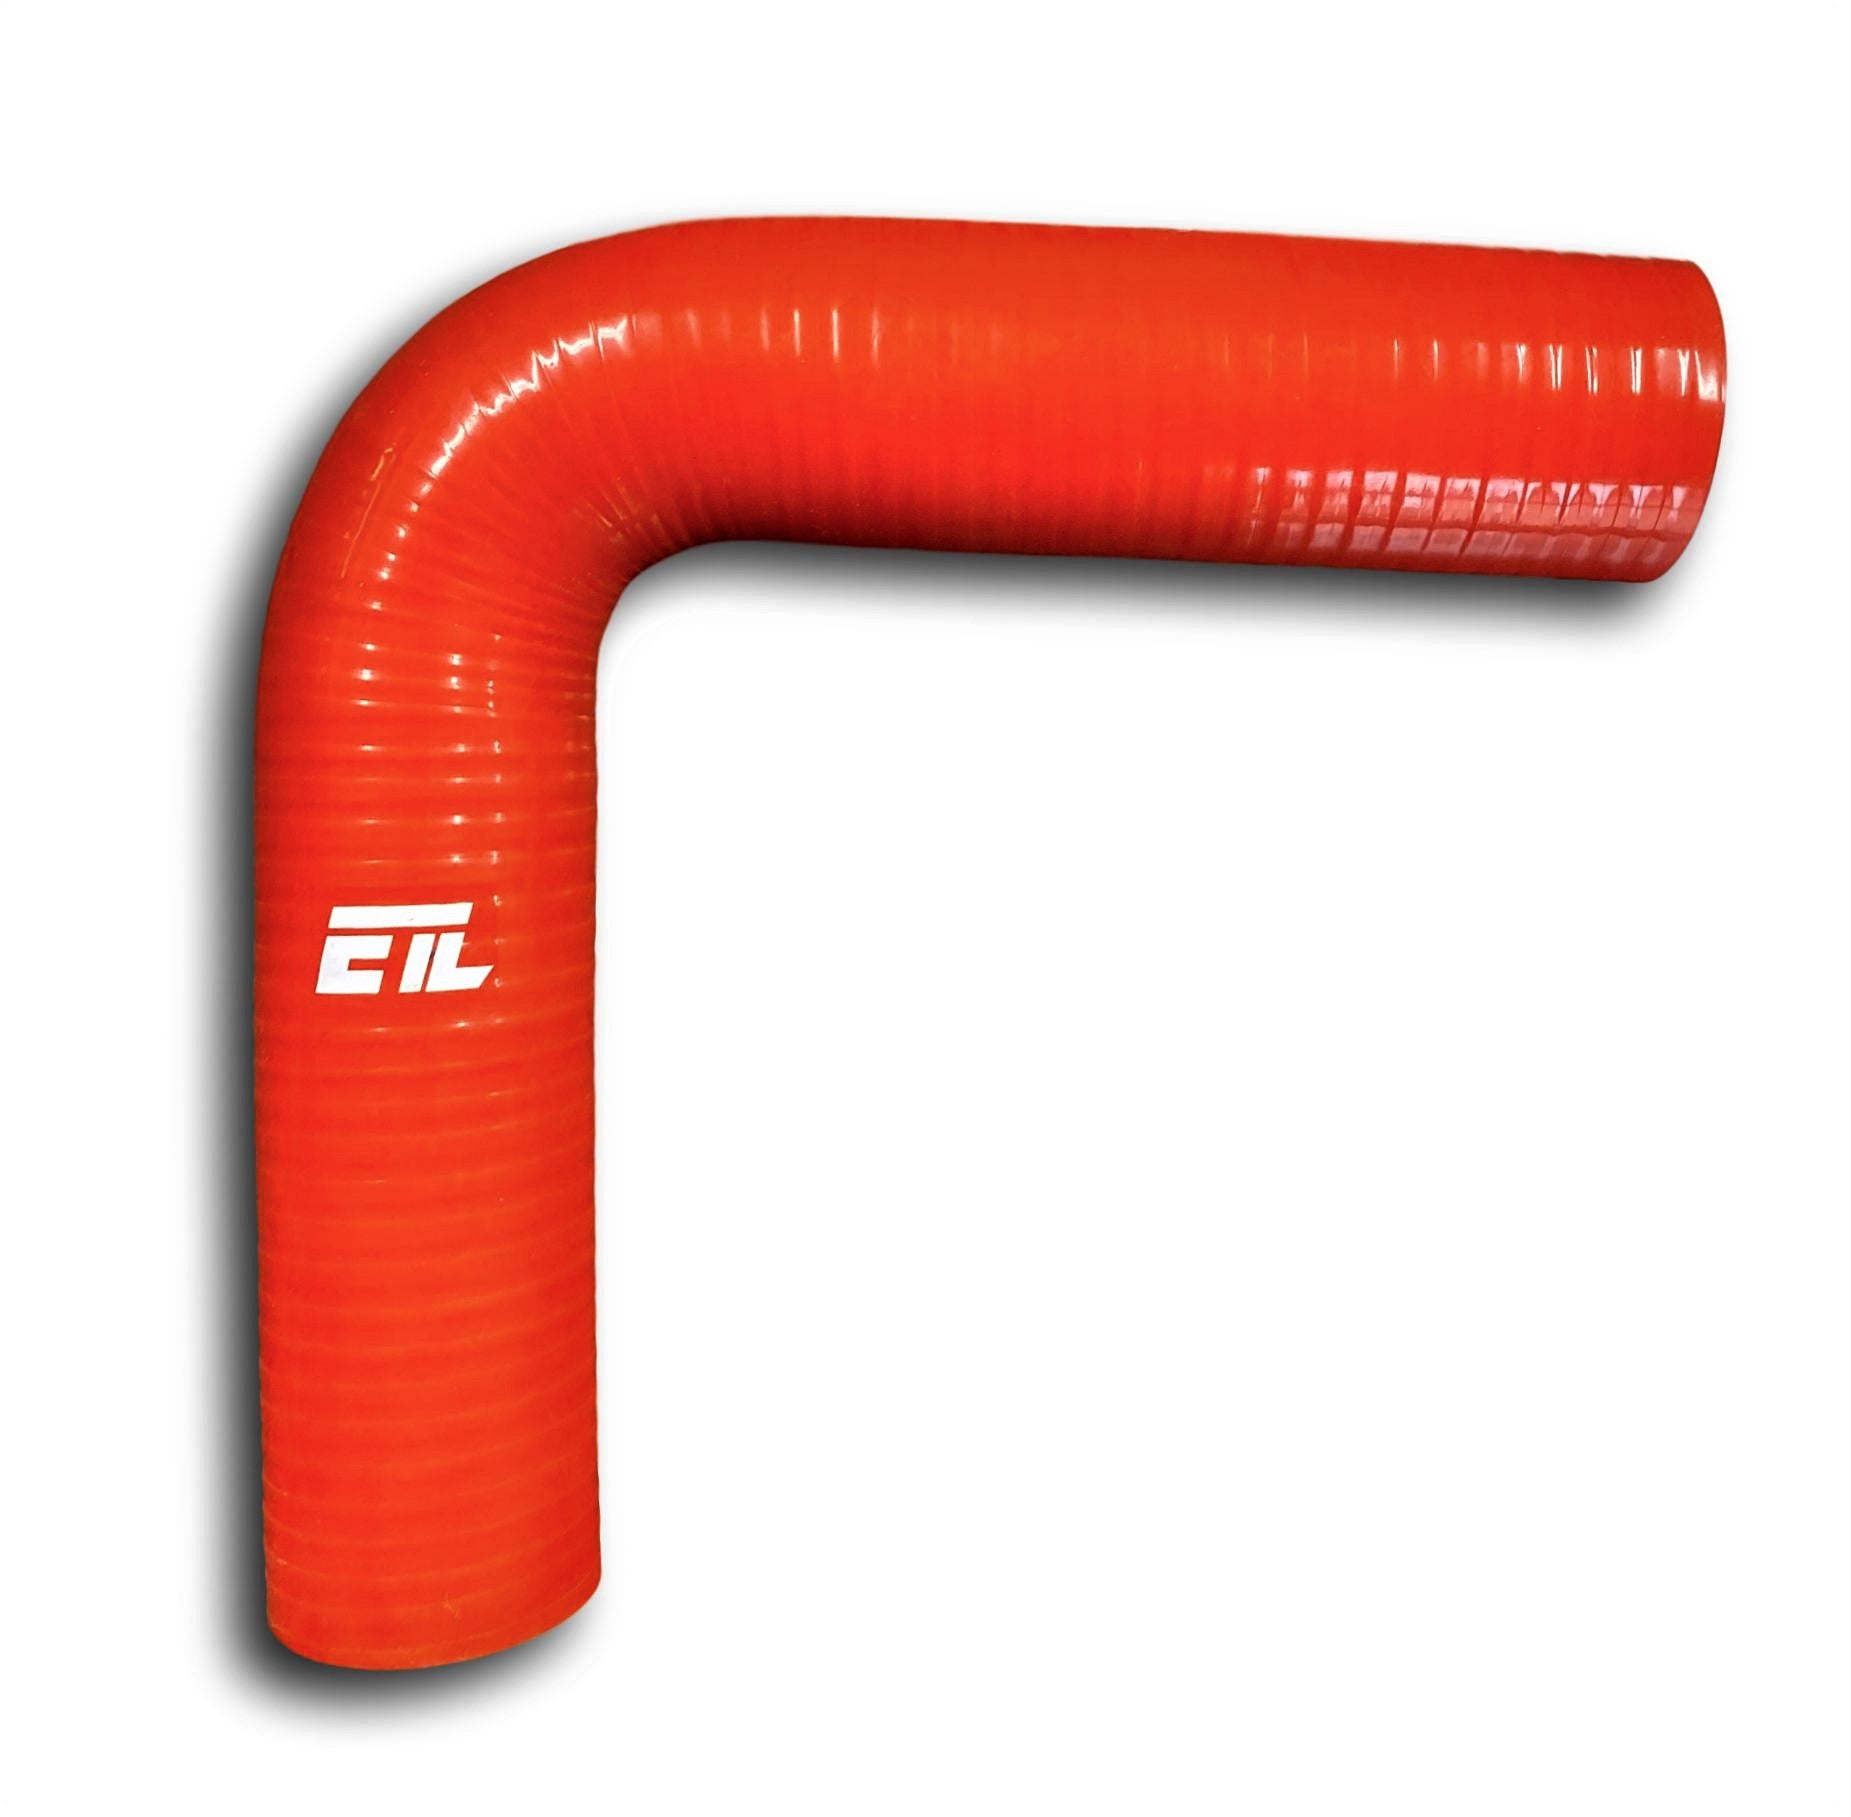 ETL Performance 235025 Silicone Elbow 2.00 Inch 90 Degree Red